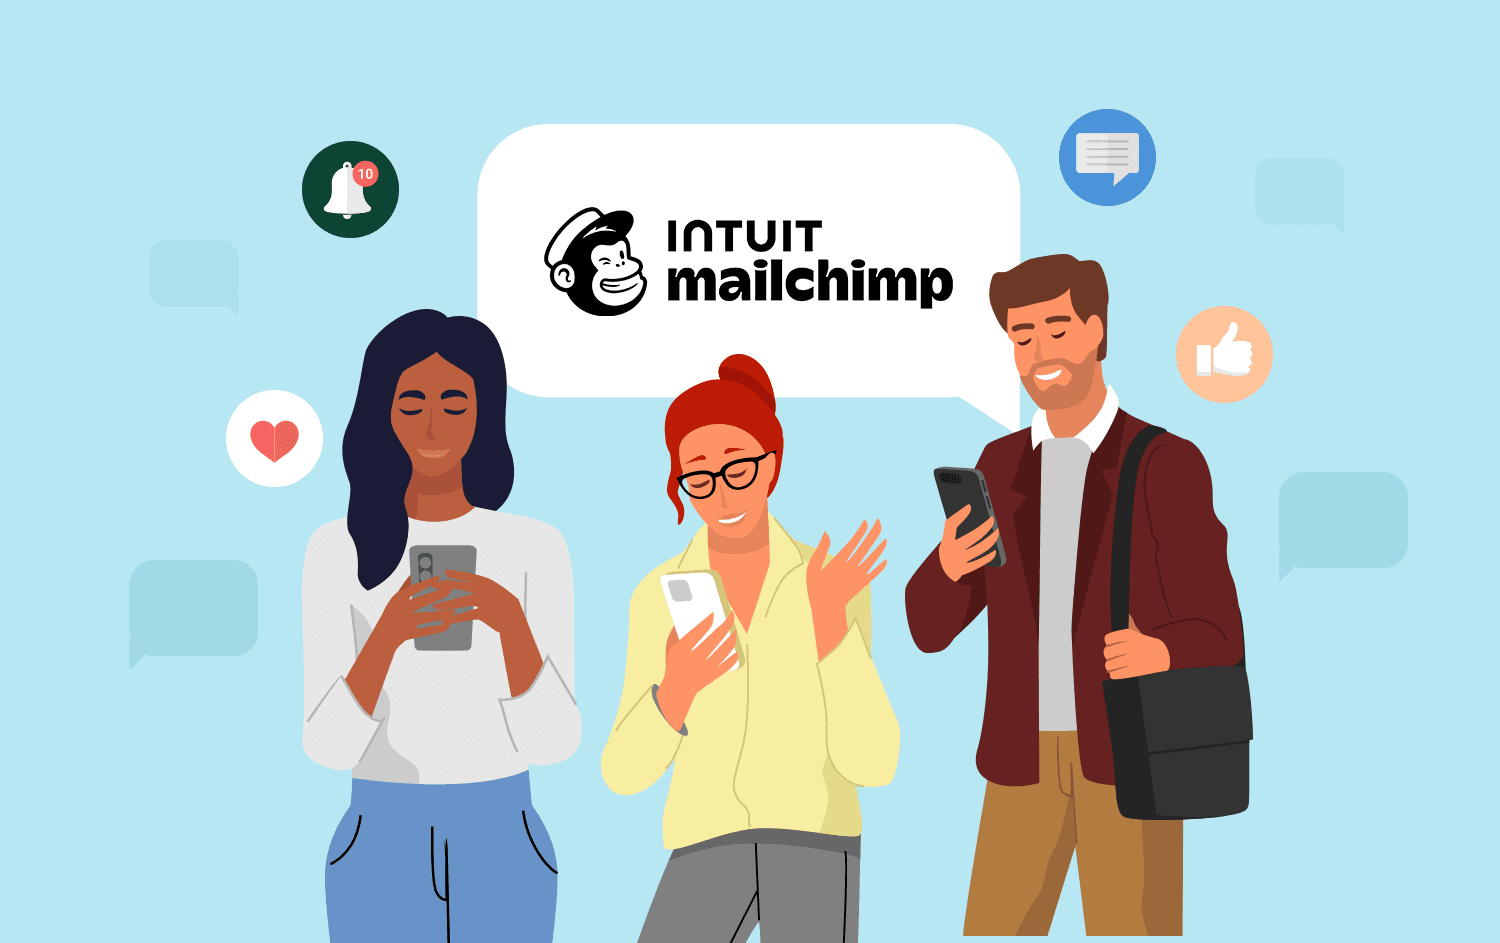 Show the Mailchimp logo with a cartoon representation of SMS bubbles and a crowd of people, some with email logos over their head, some with SMS logos over their head, and some with both, indicating that they are receiving emails and/or text messages